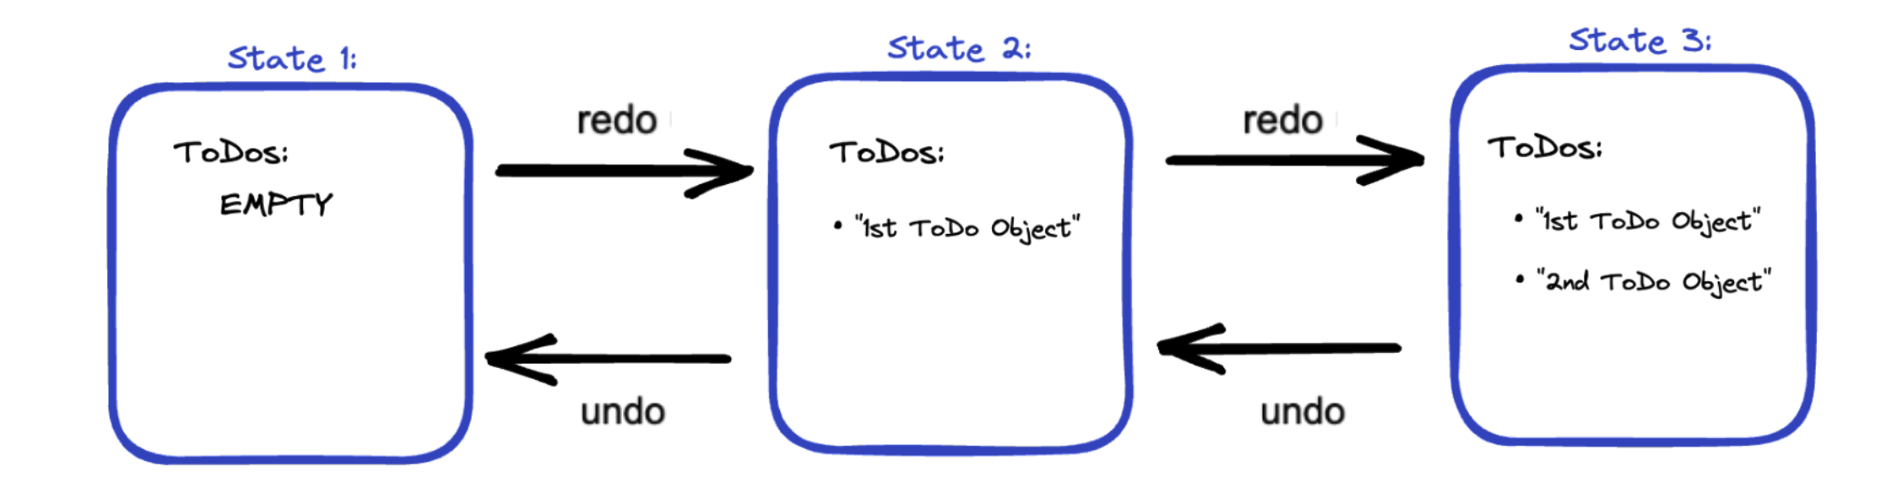 Representation of states as a linked list